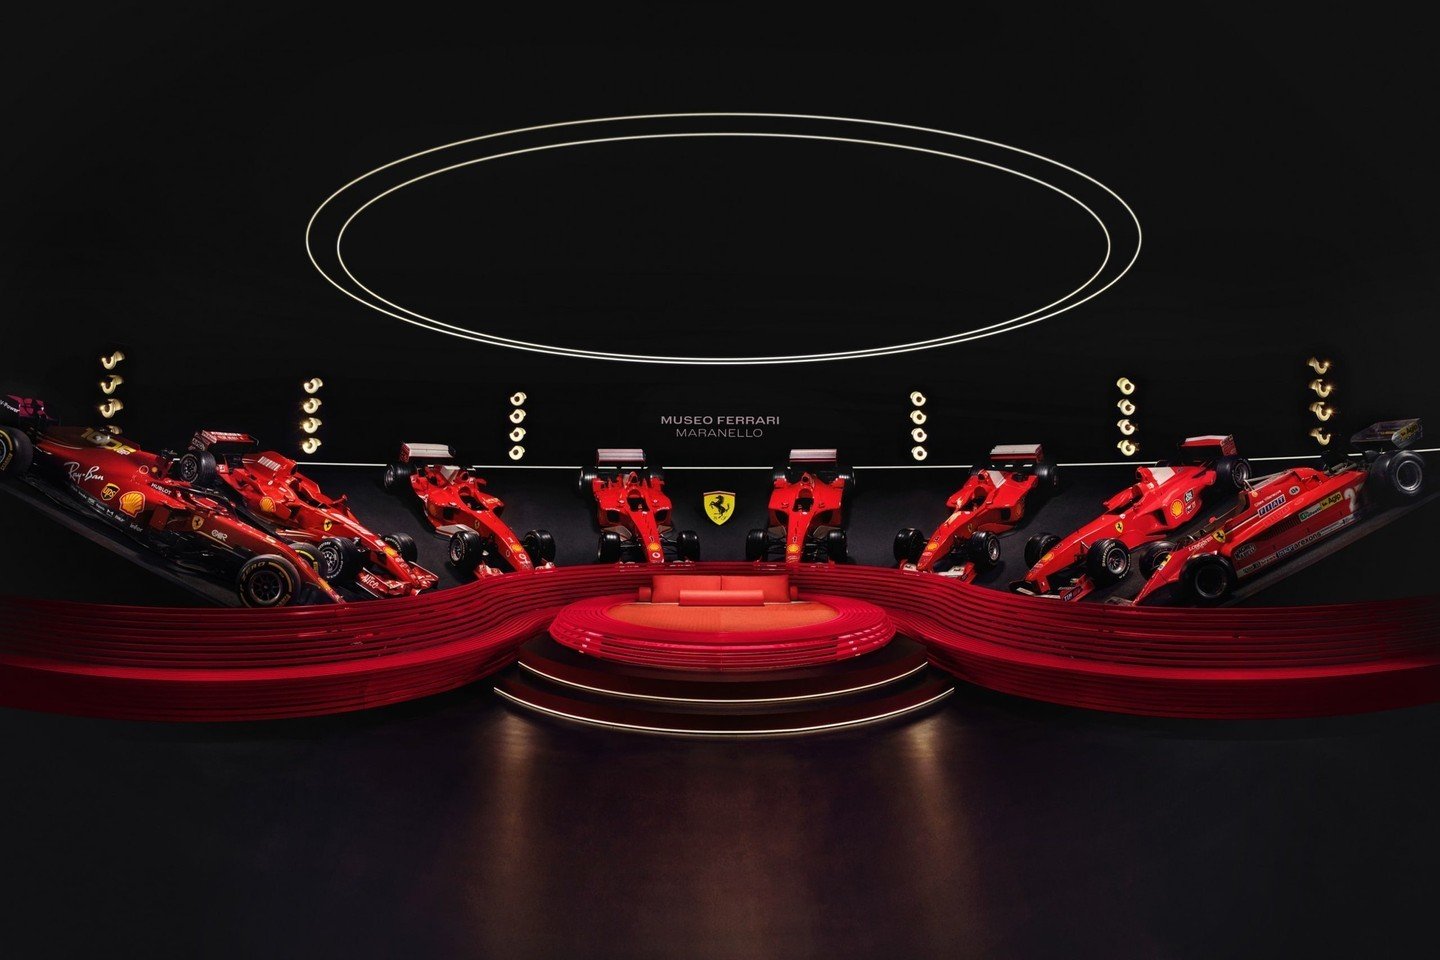 You could spend a night with a whole stable of Italian stallions at the @ferrari museum thanks to a unique offer from @airbnb - but you&rsquo;ll need to be as fast as a Formula 1 driver to catch it.⁠
⁠
Find out more at the link in bio.⁠
⁠
===========